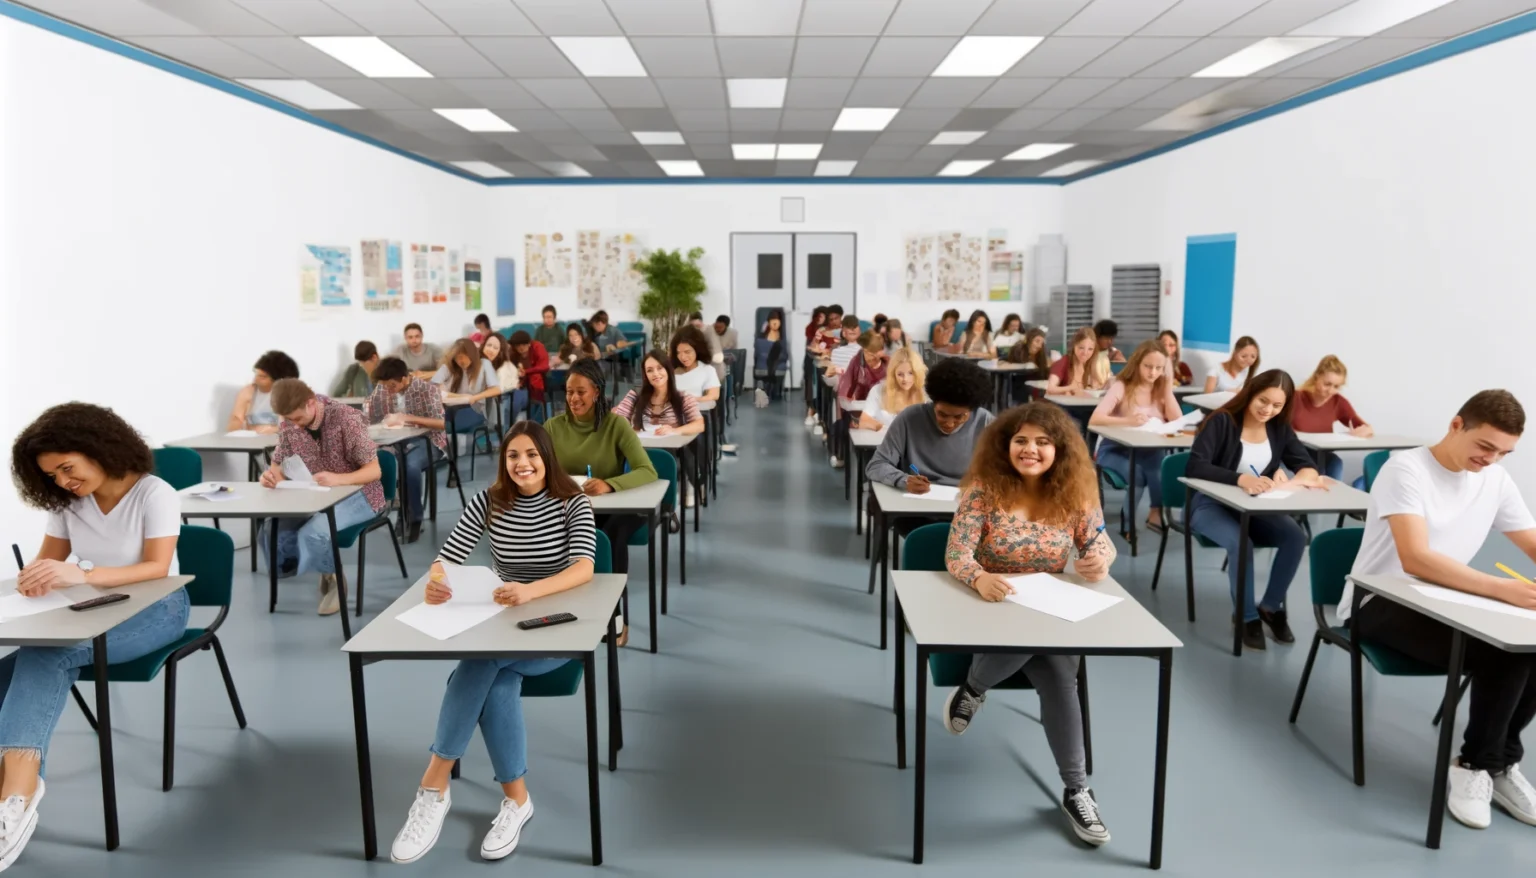 DALL·E 2024-04-20 17.35.30 - A wide classroom setting with a diverse group of people casually dressed, taking an exam and asking questions, all looking excited and happy. The room